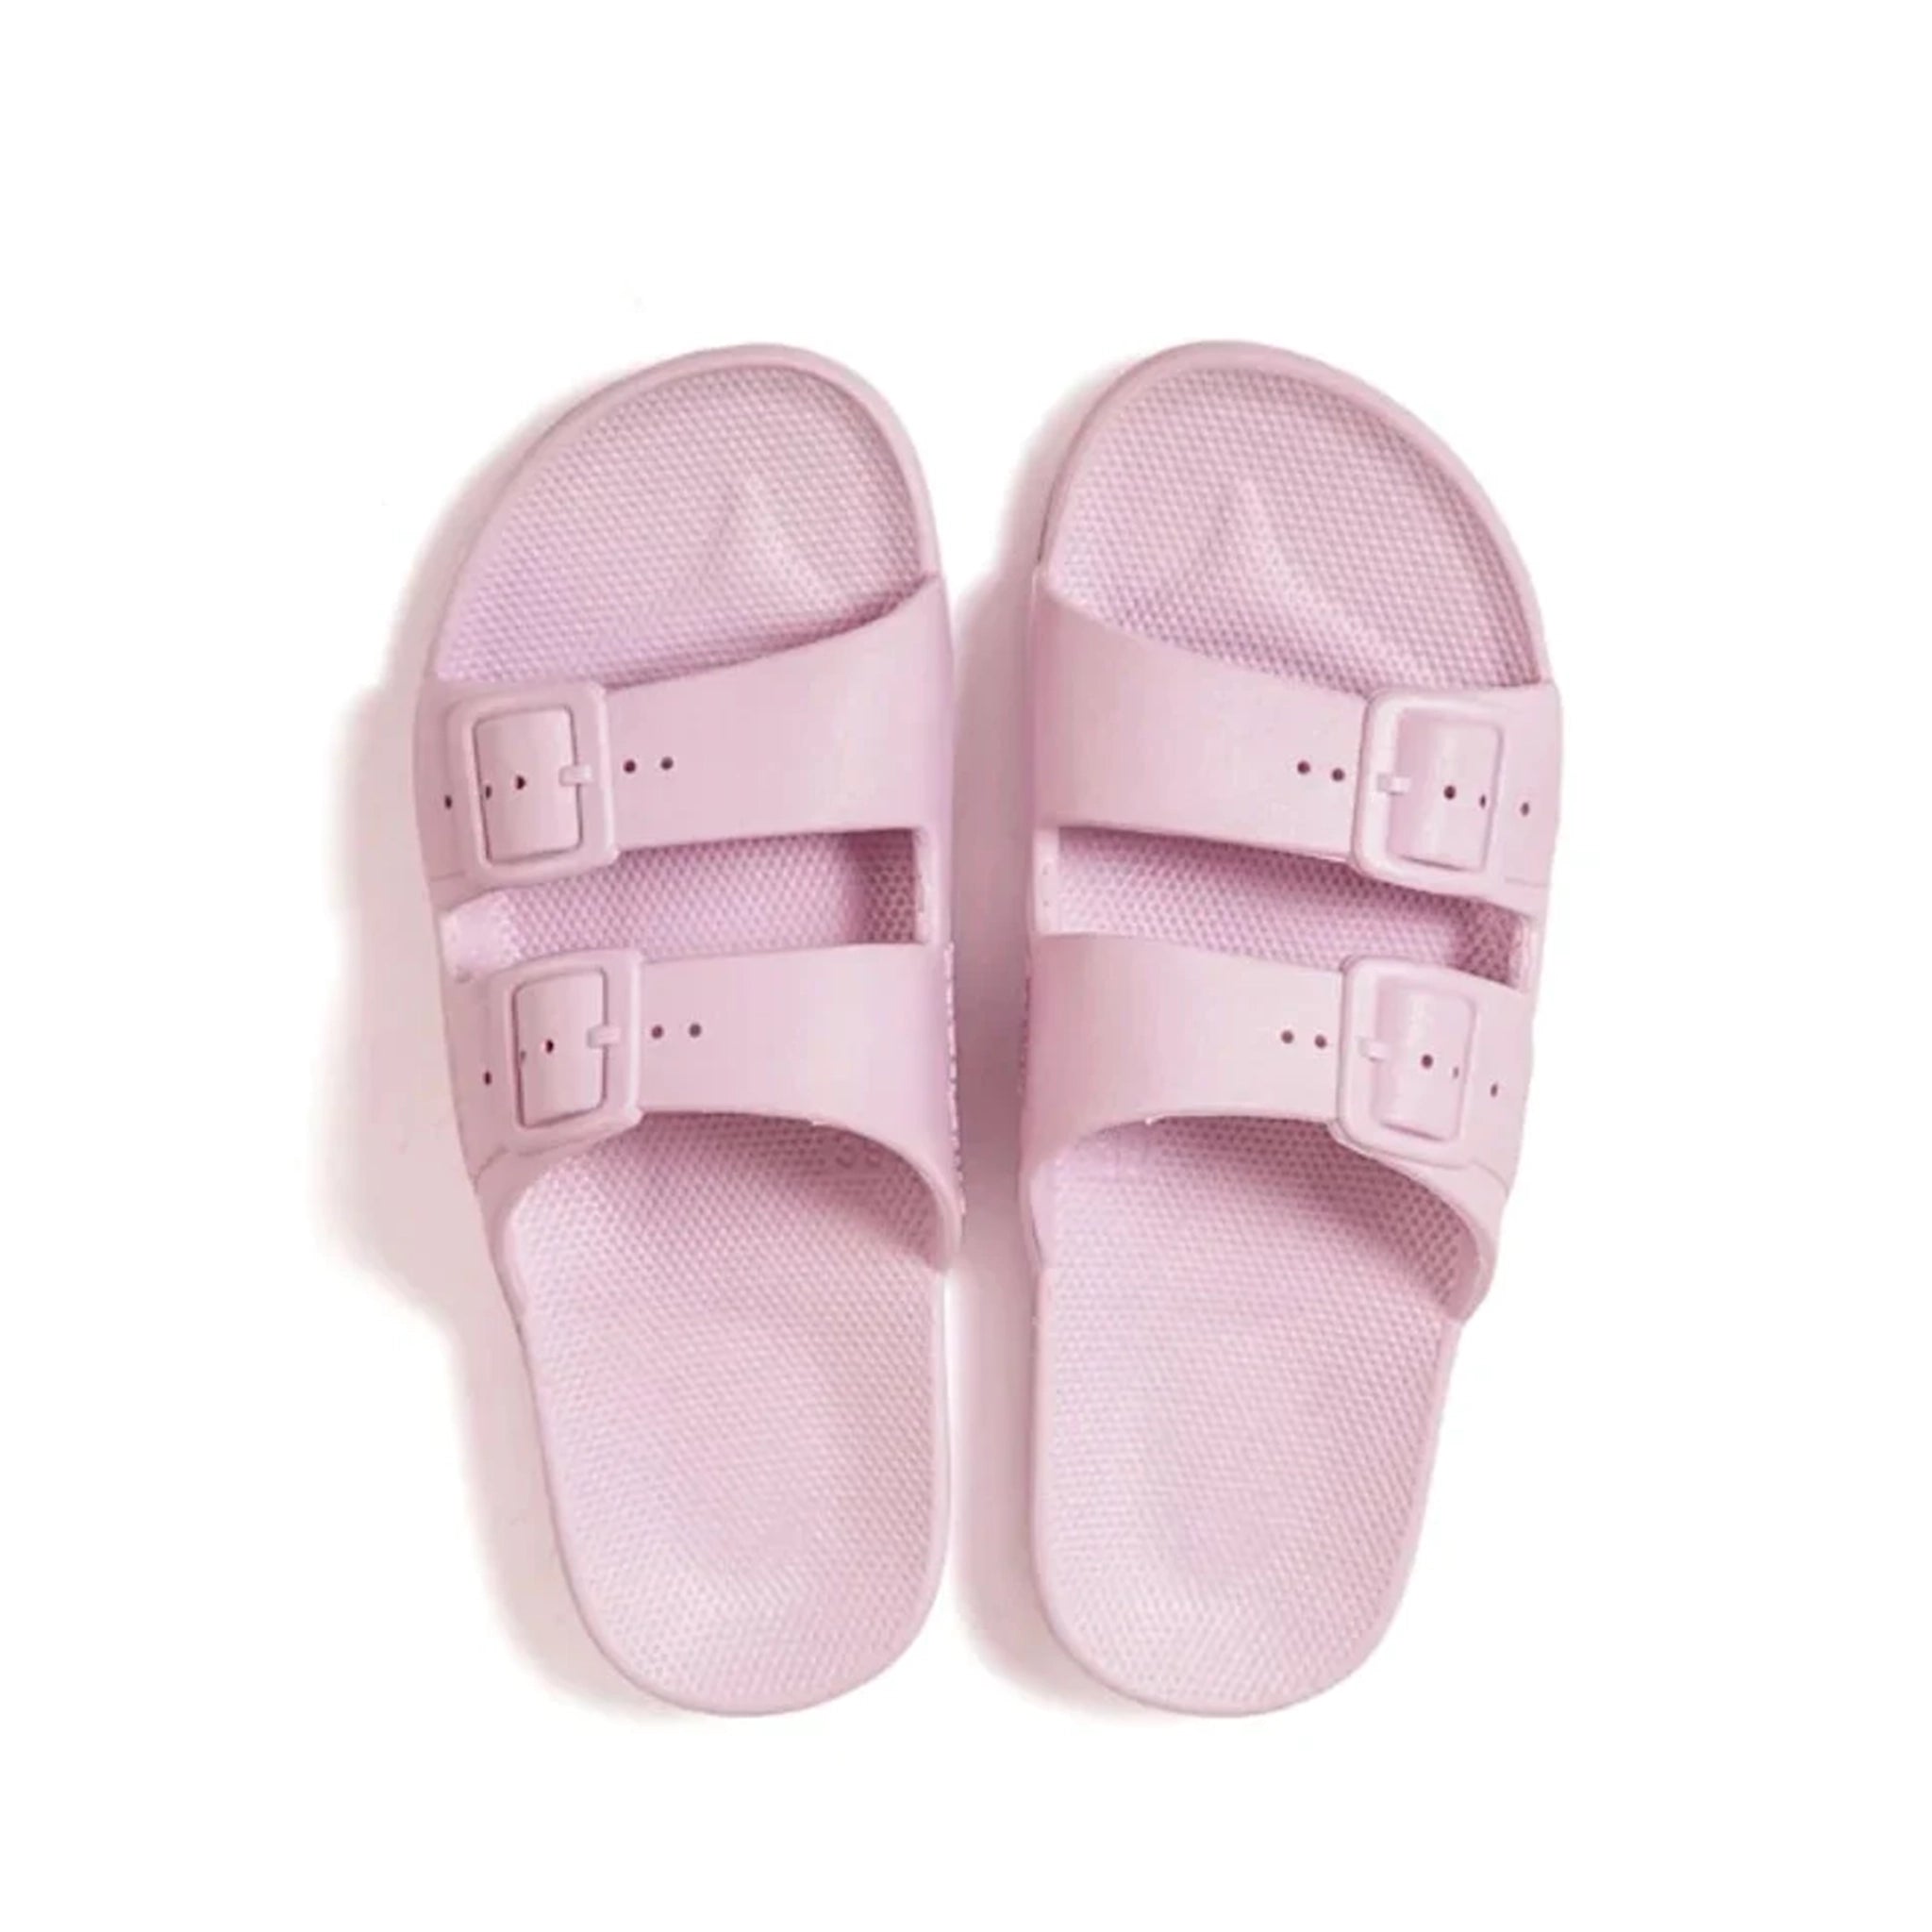 On a white background is a pair of light pink cloud sandals with two straps going across the front. 